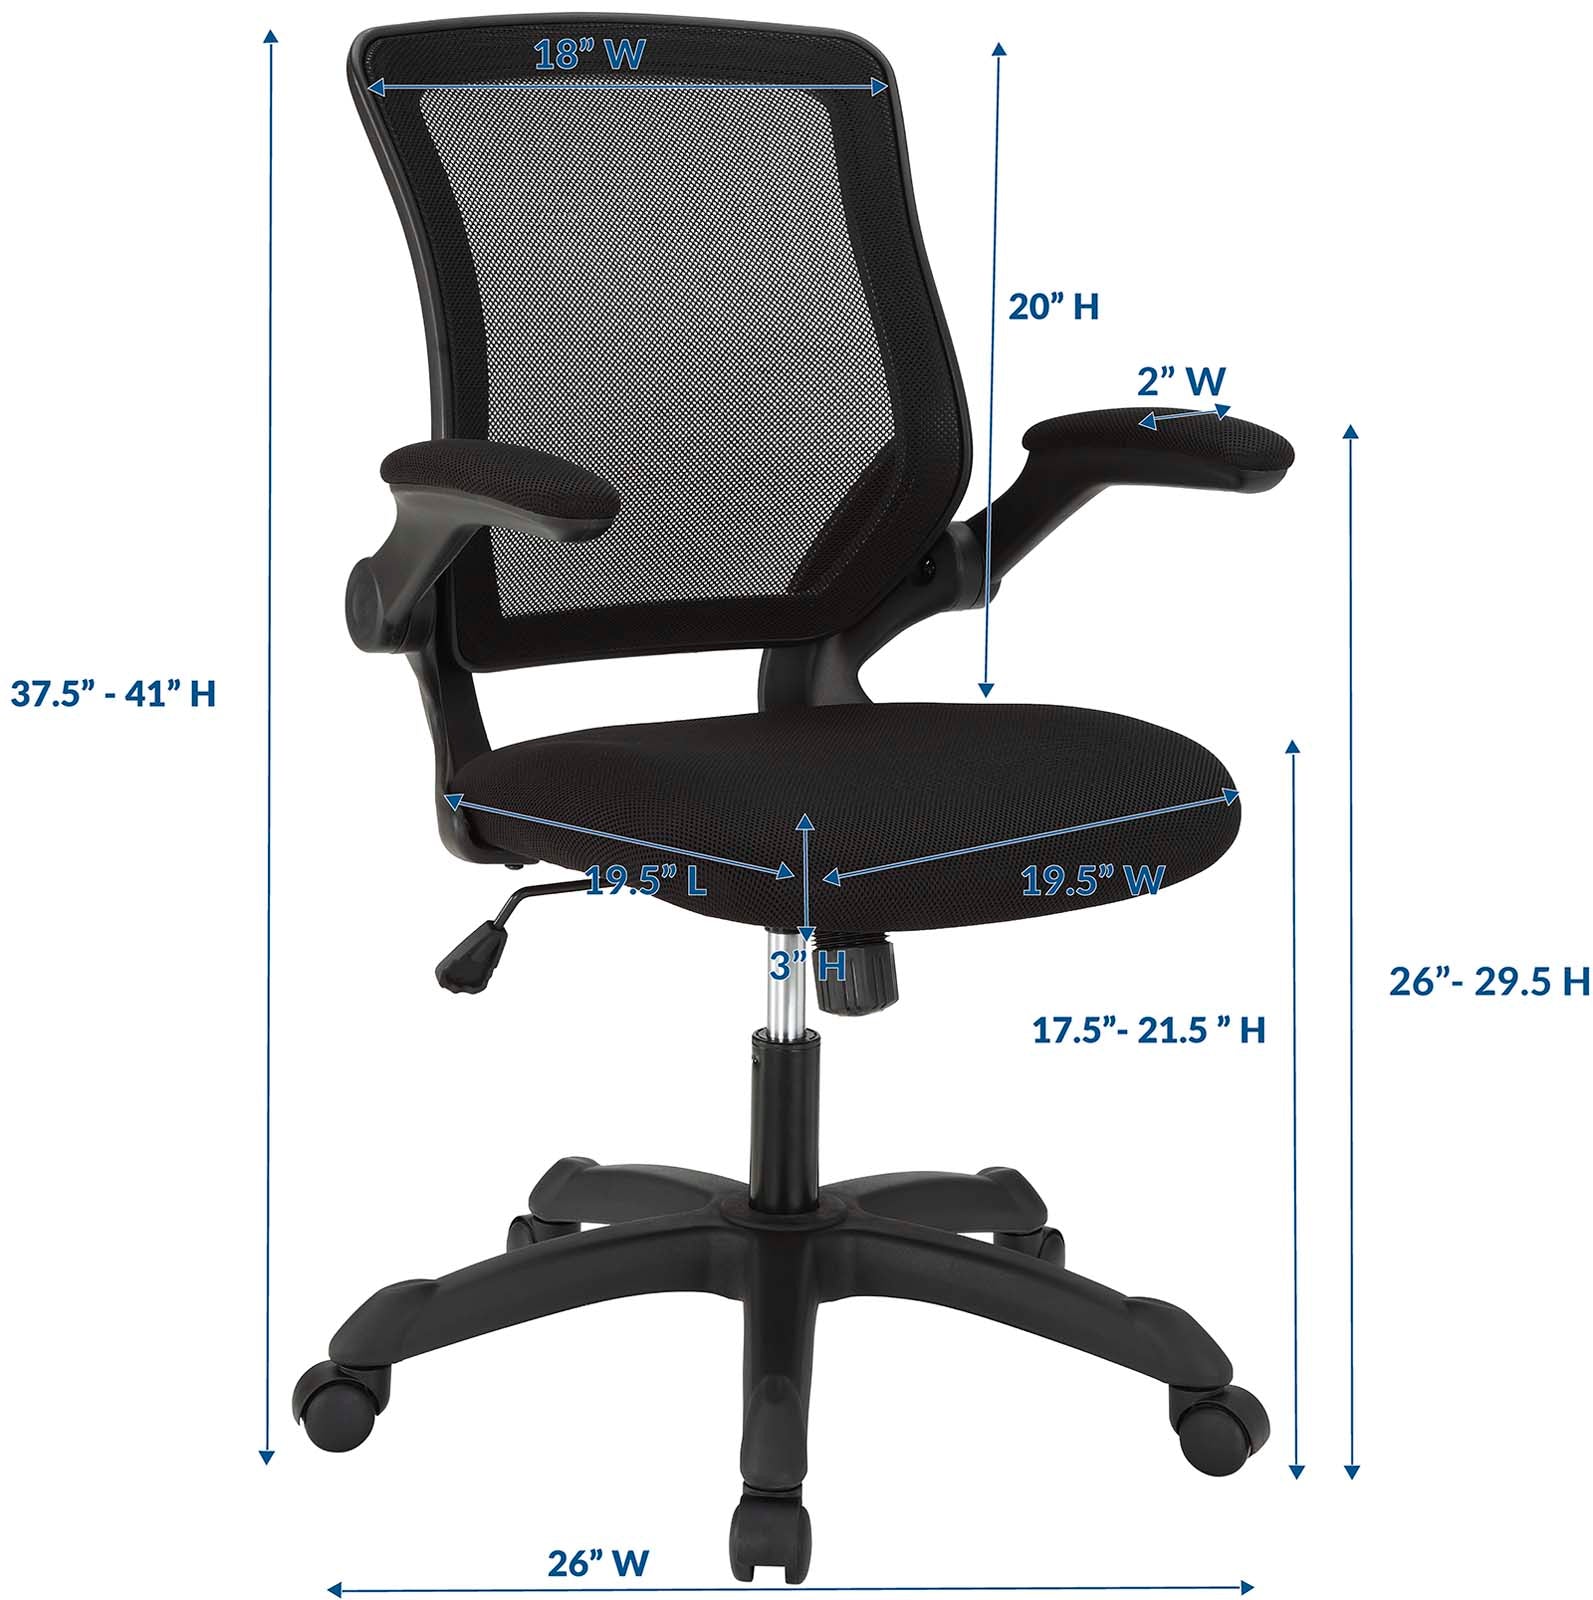 Modway Task Chairs - Veer Mesh Office Chair Black